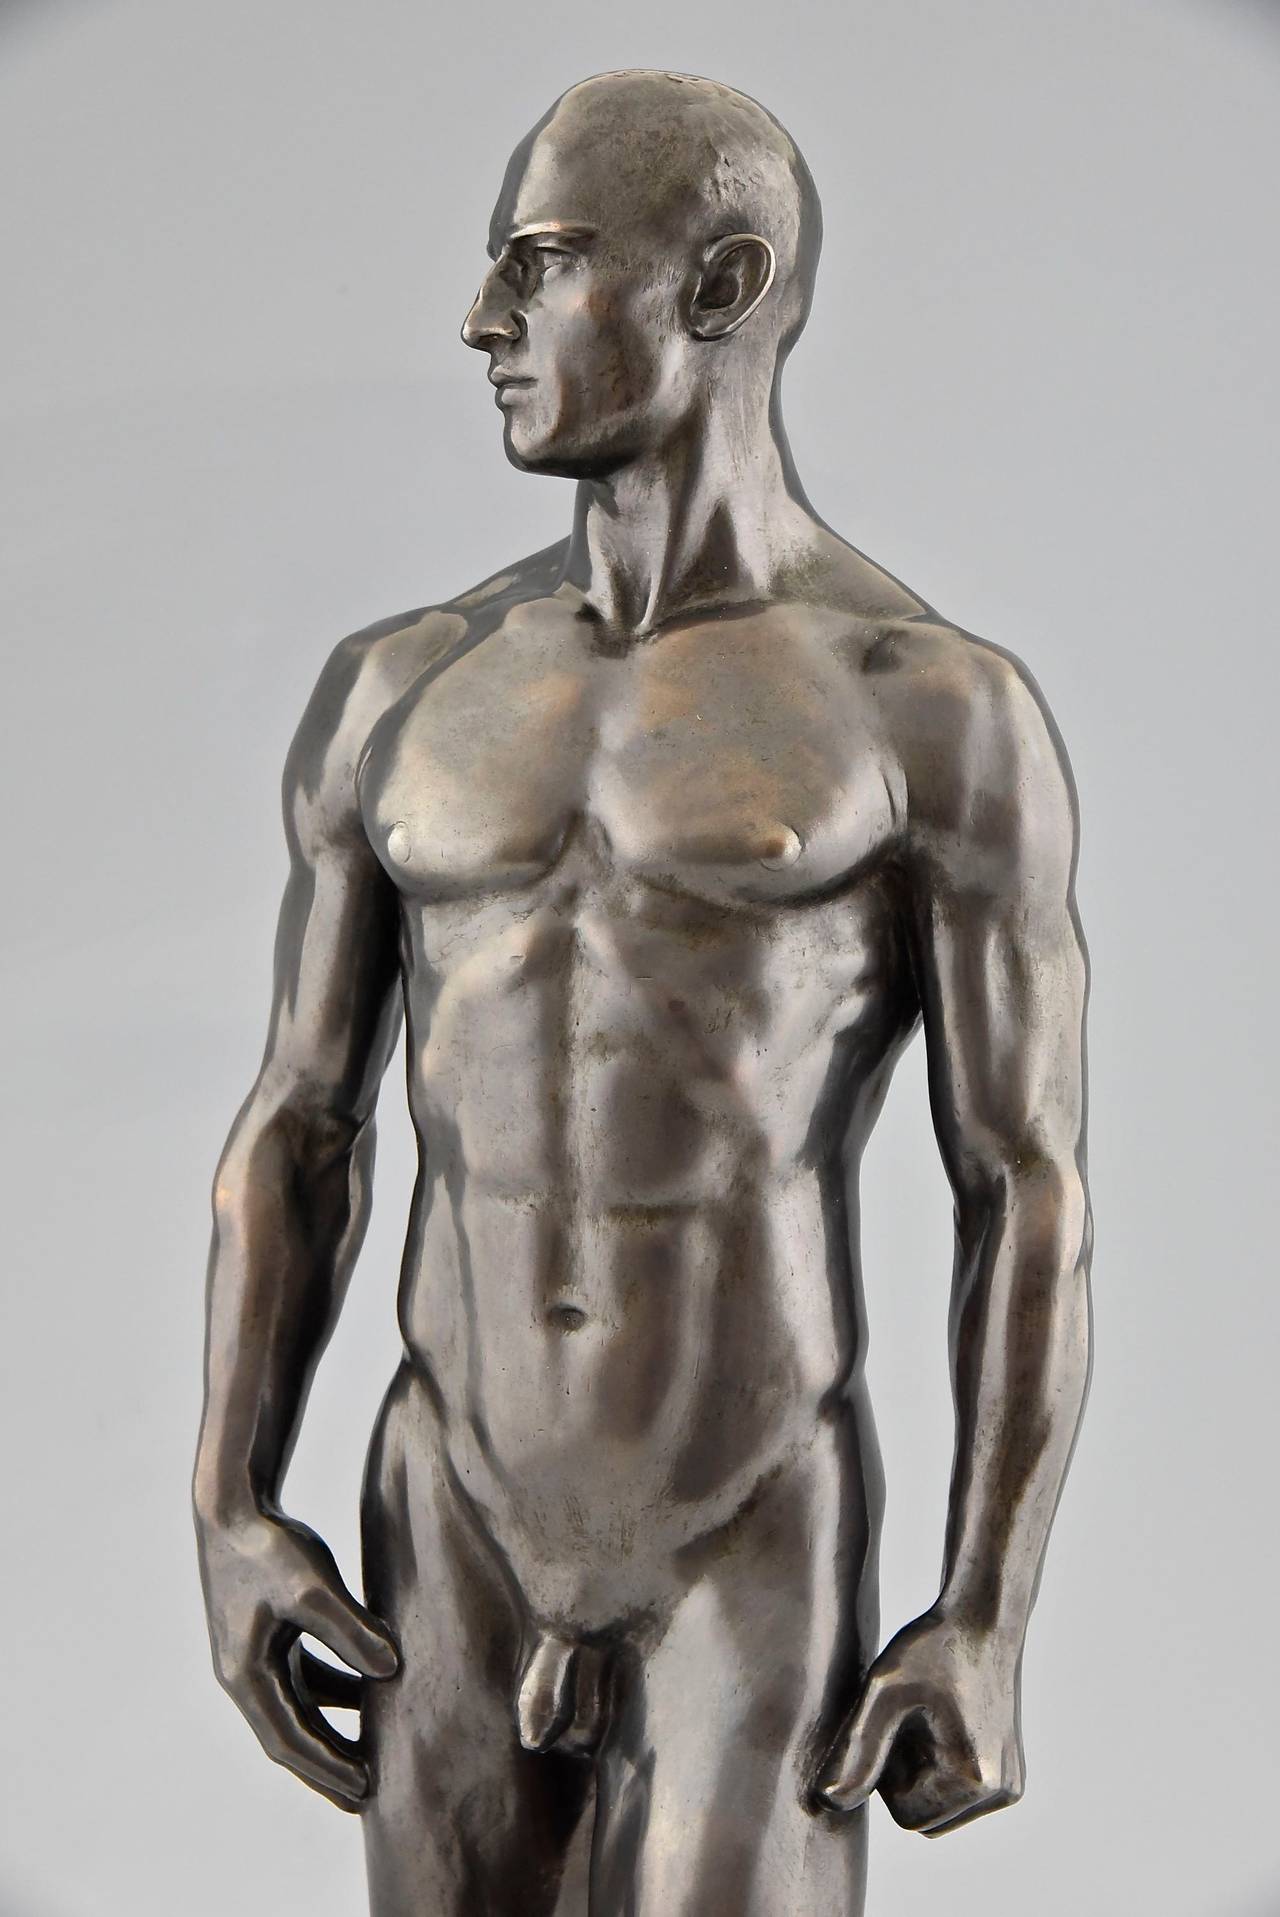 Antique Sculpture of a Male Nude by Hans Retzbach, Germany, 1919 at ...